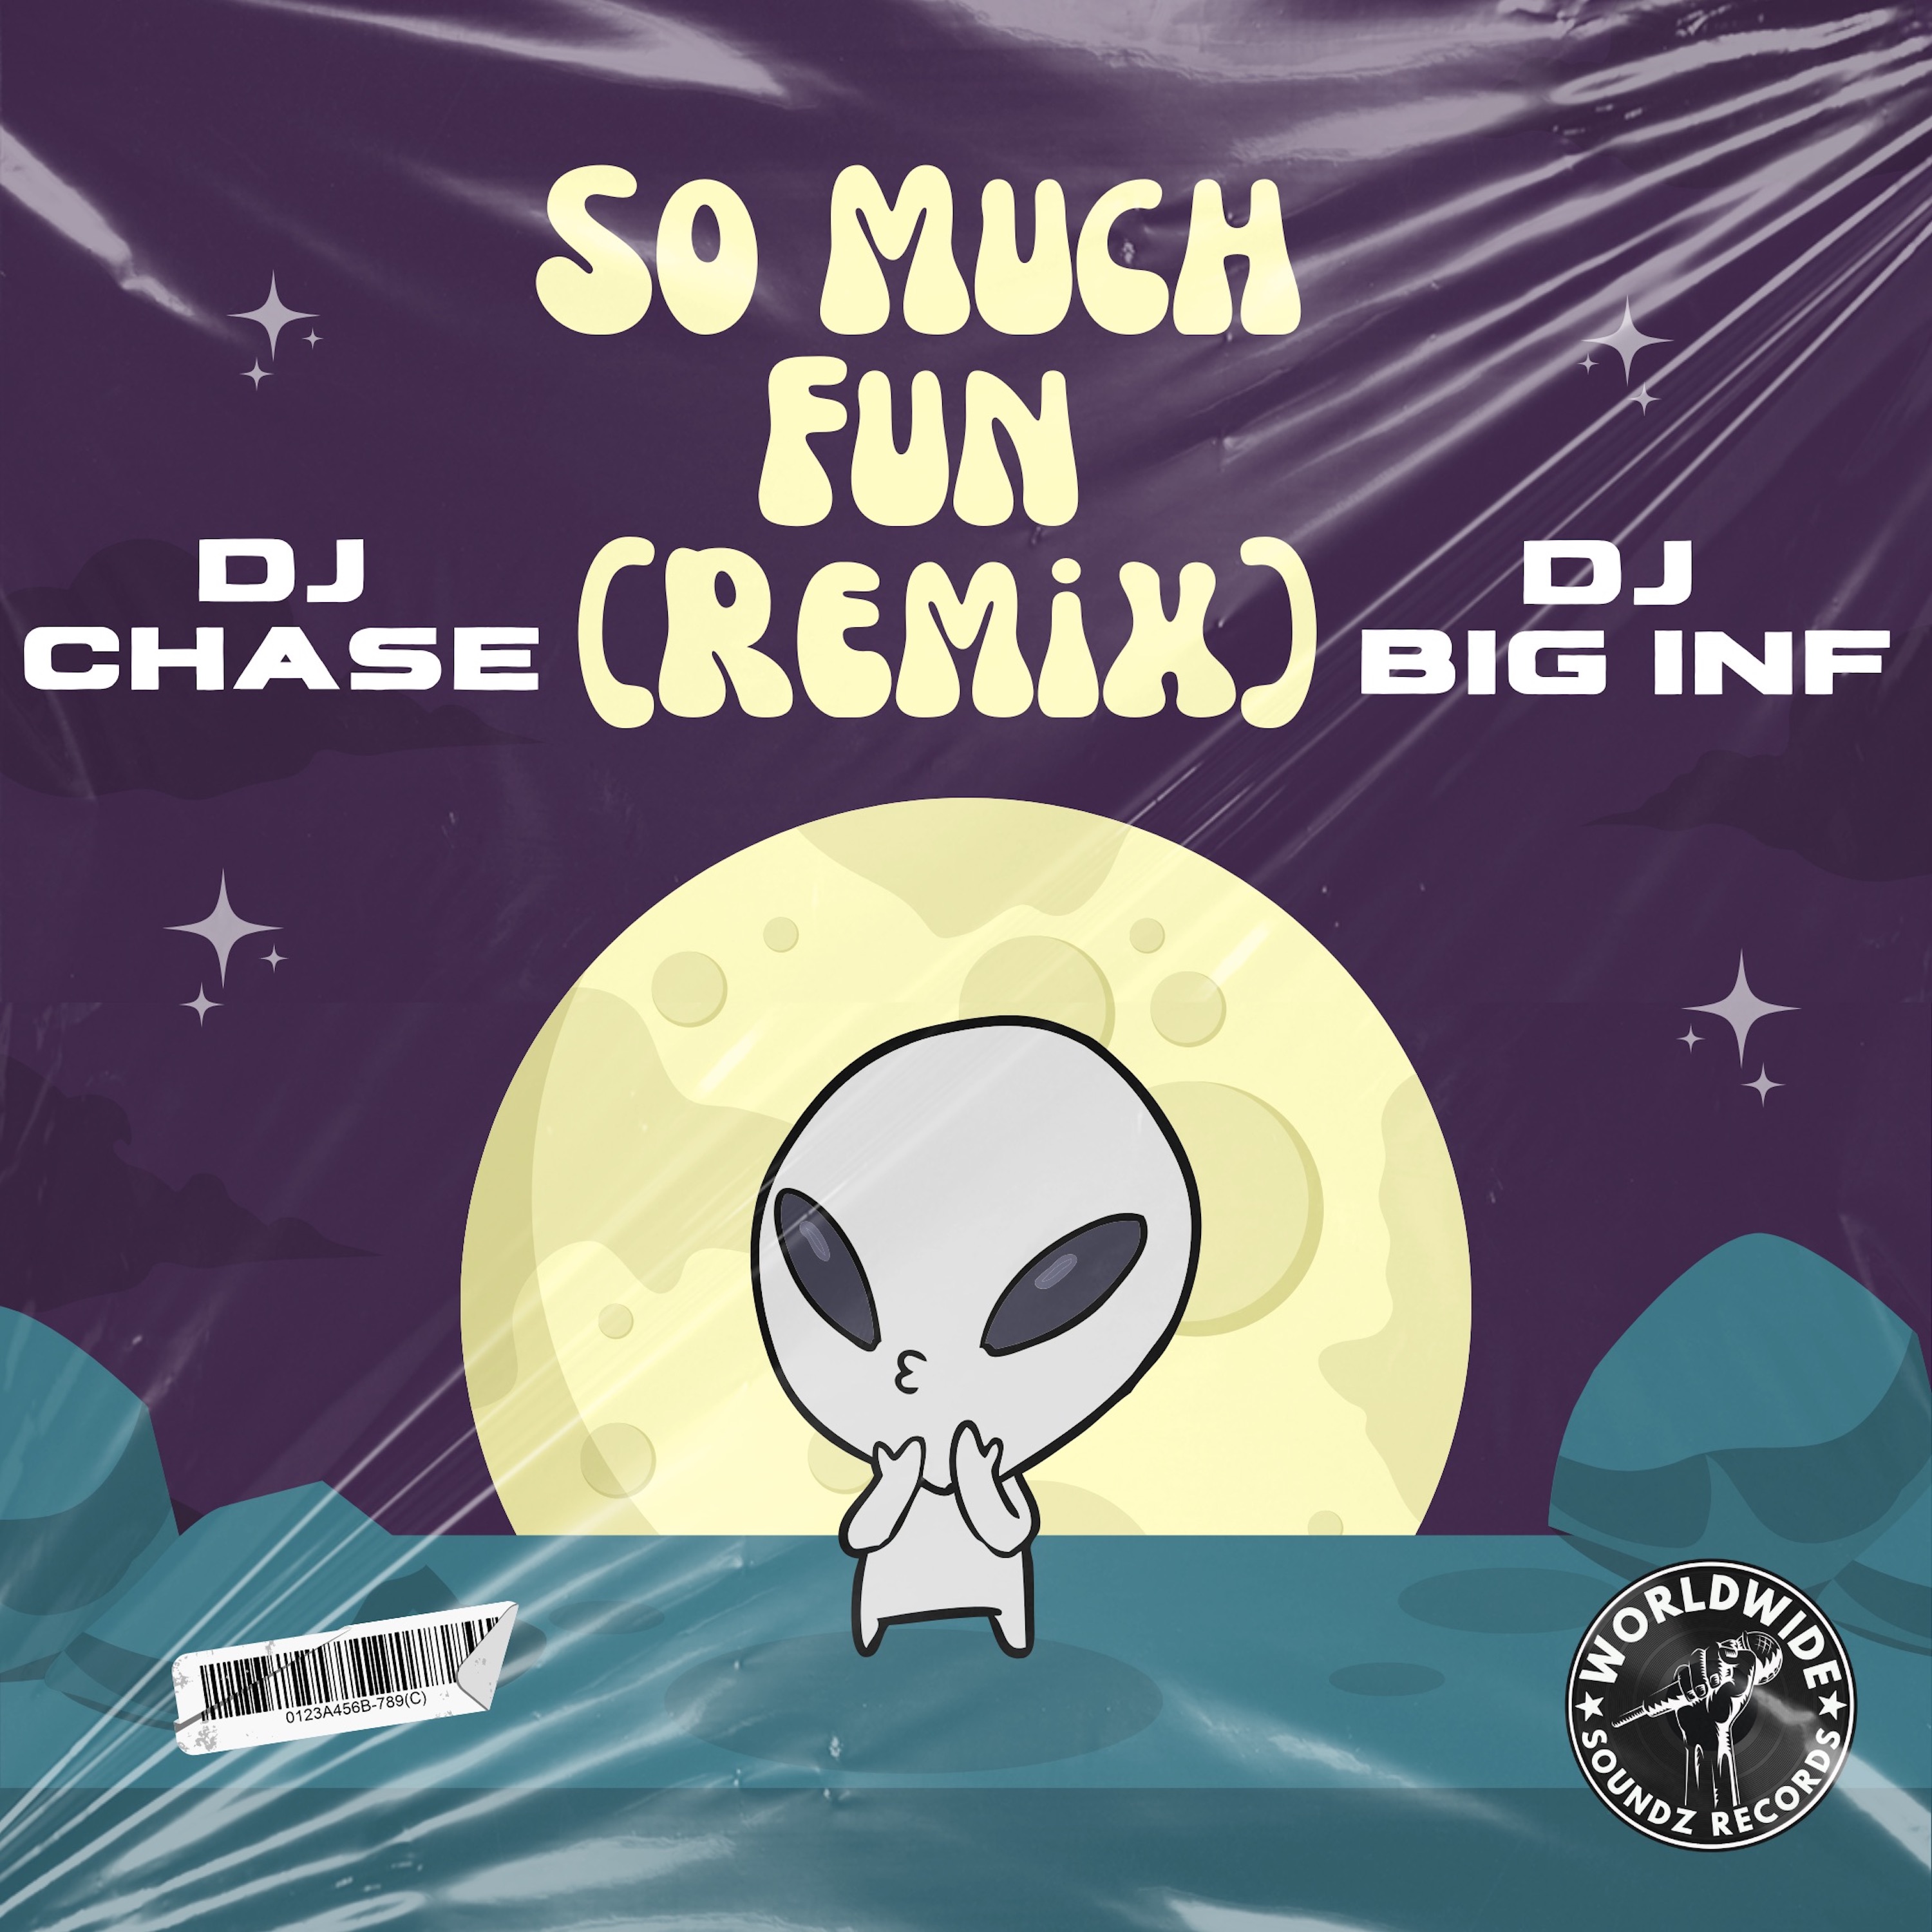 Art for So Much Fun (Remix)  by DJ Chase Feat. Dj Big Inf